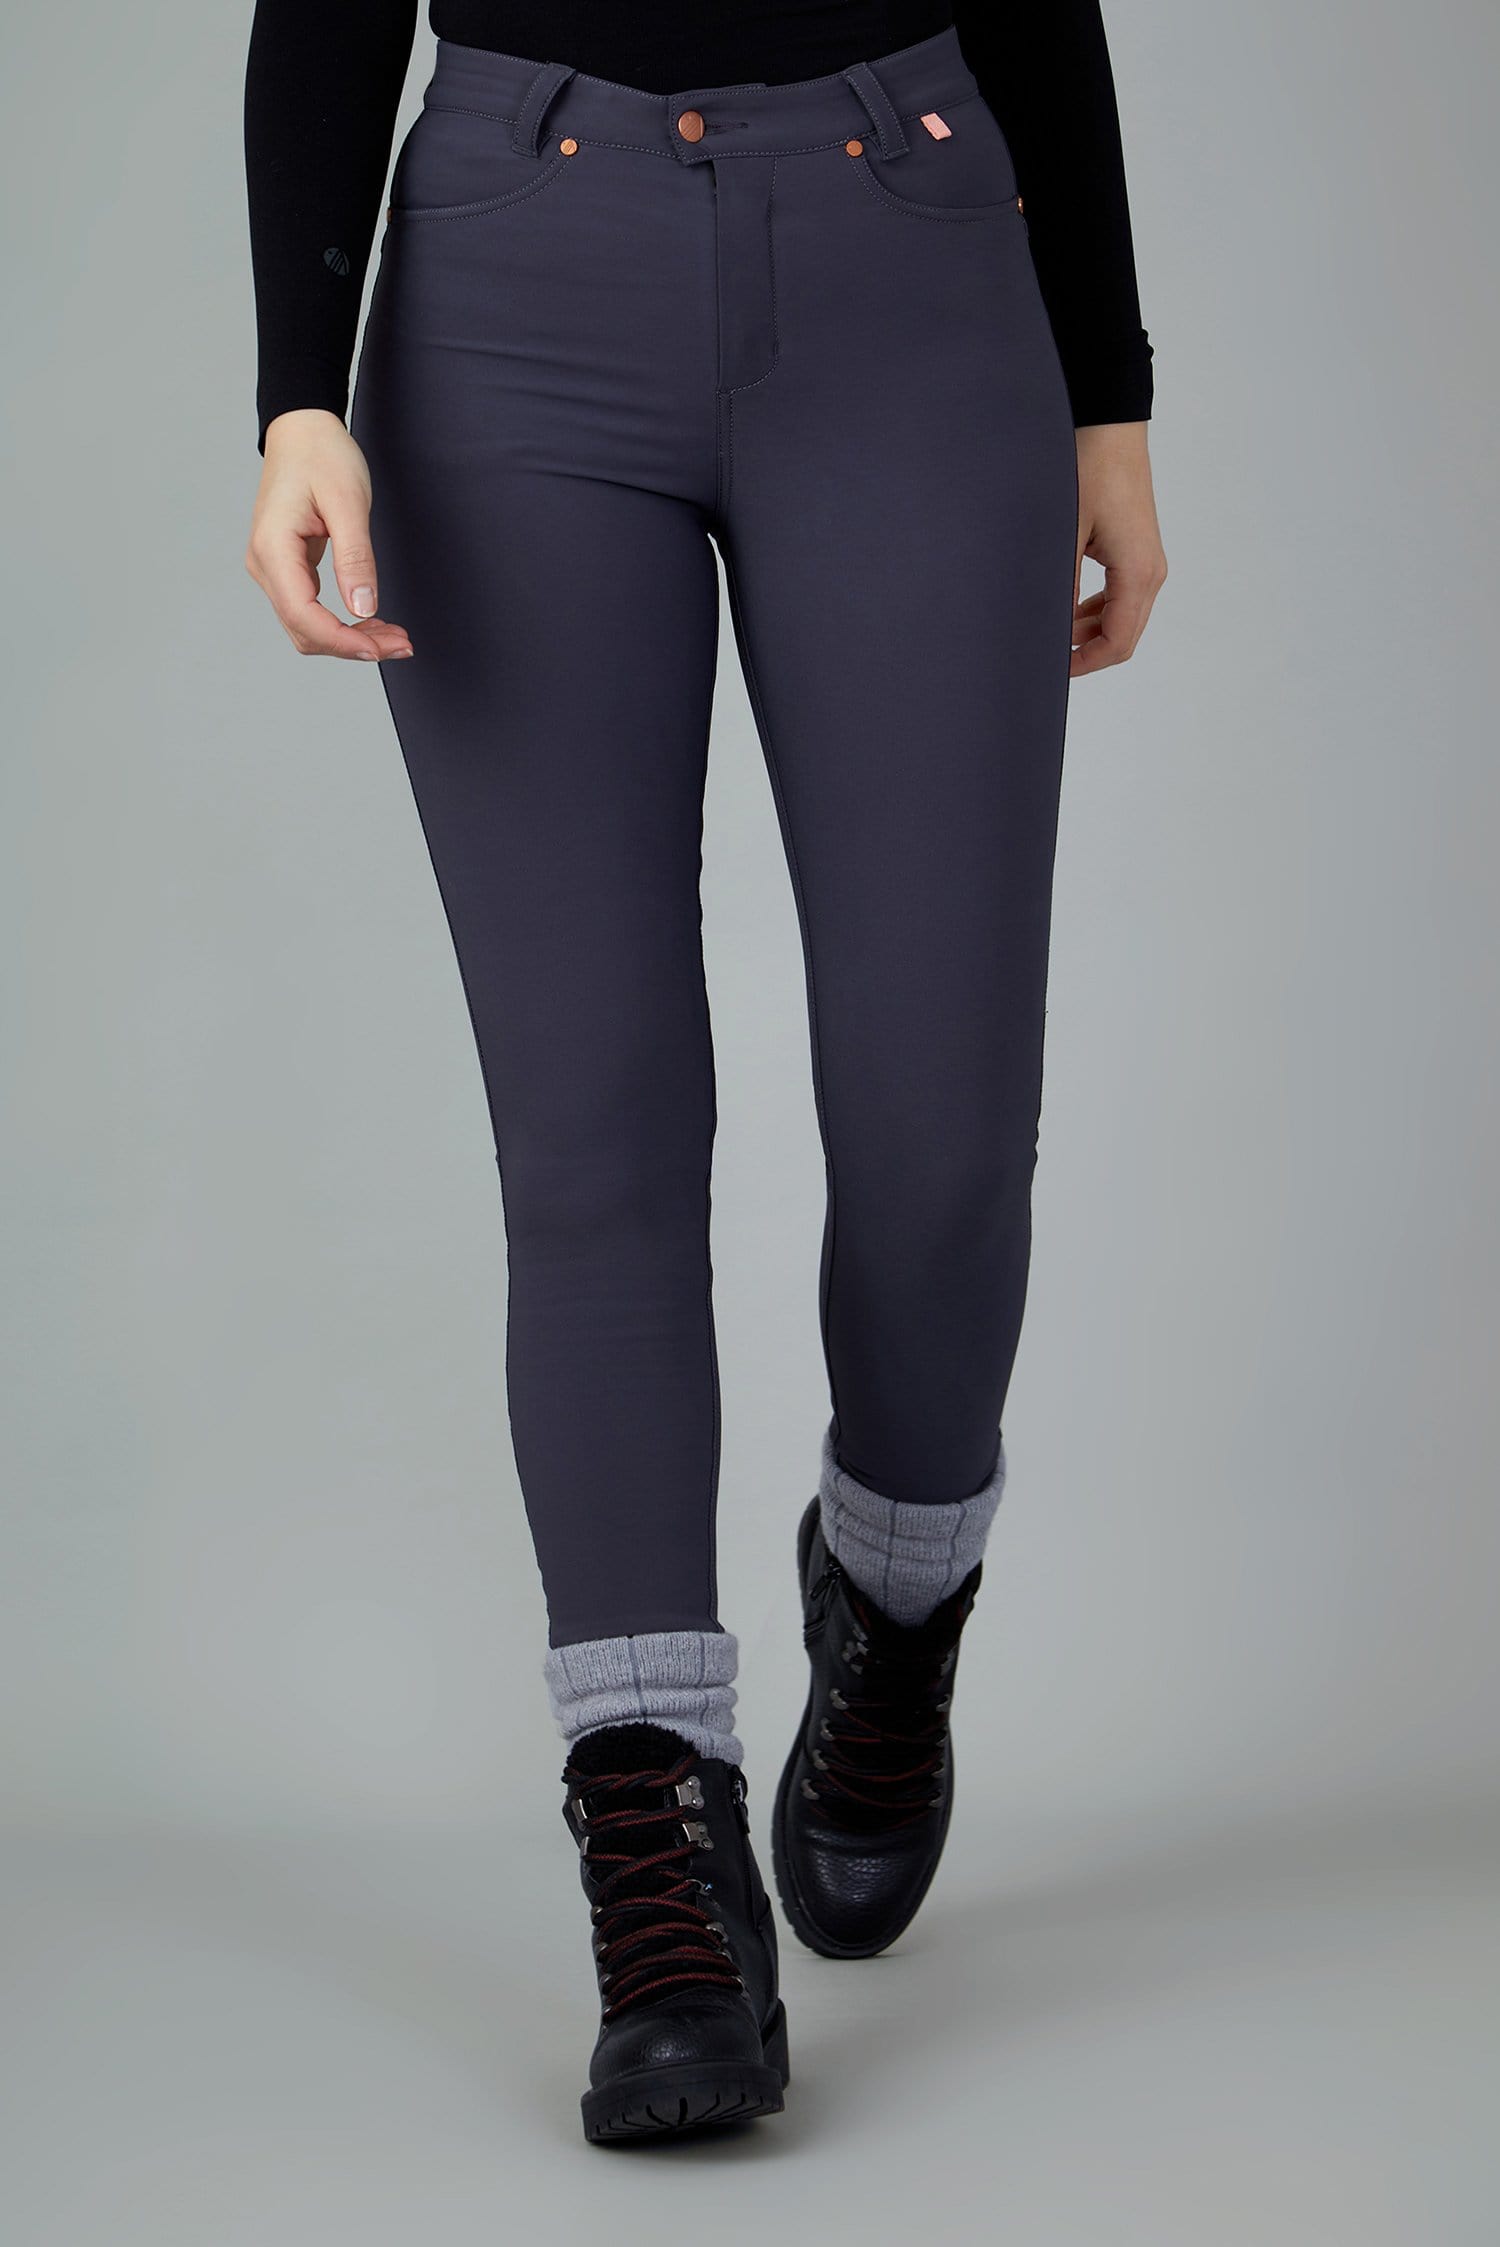 The Aventurite Stretch Skinny Outdoor Trousers - Obsidian - 30l / Uk12 - Womens - Acai Outdoorwear